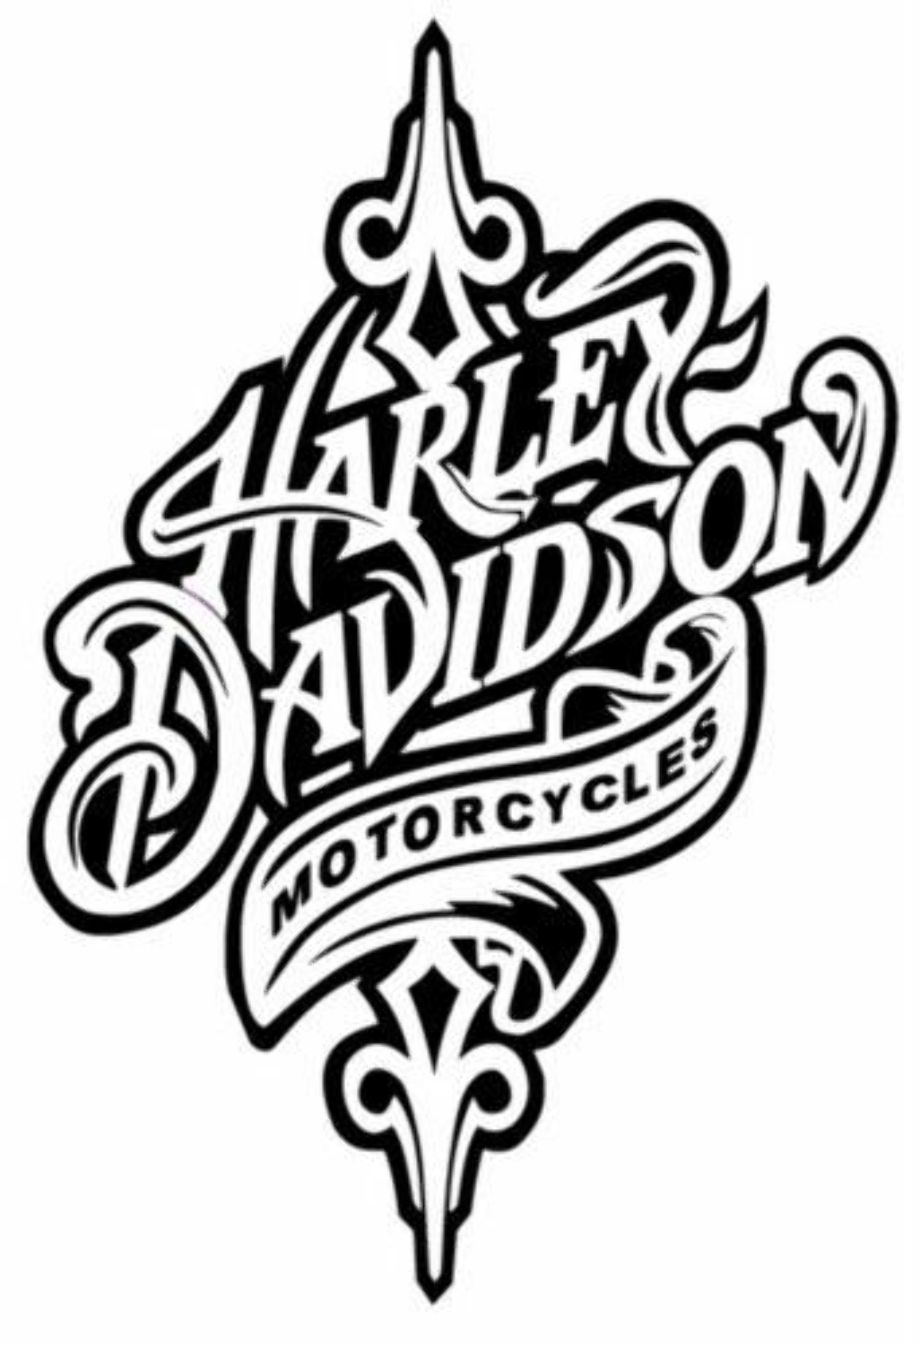 Download High Quality harley logo silhouette Transparent PNG Images ...